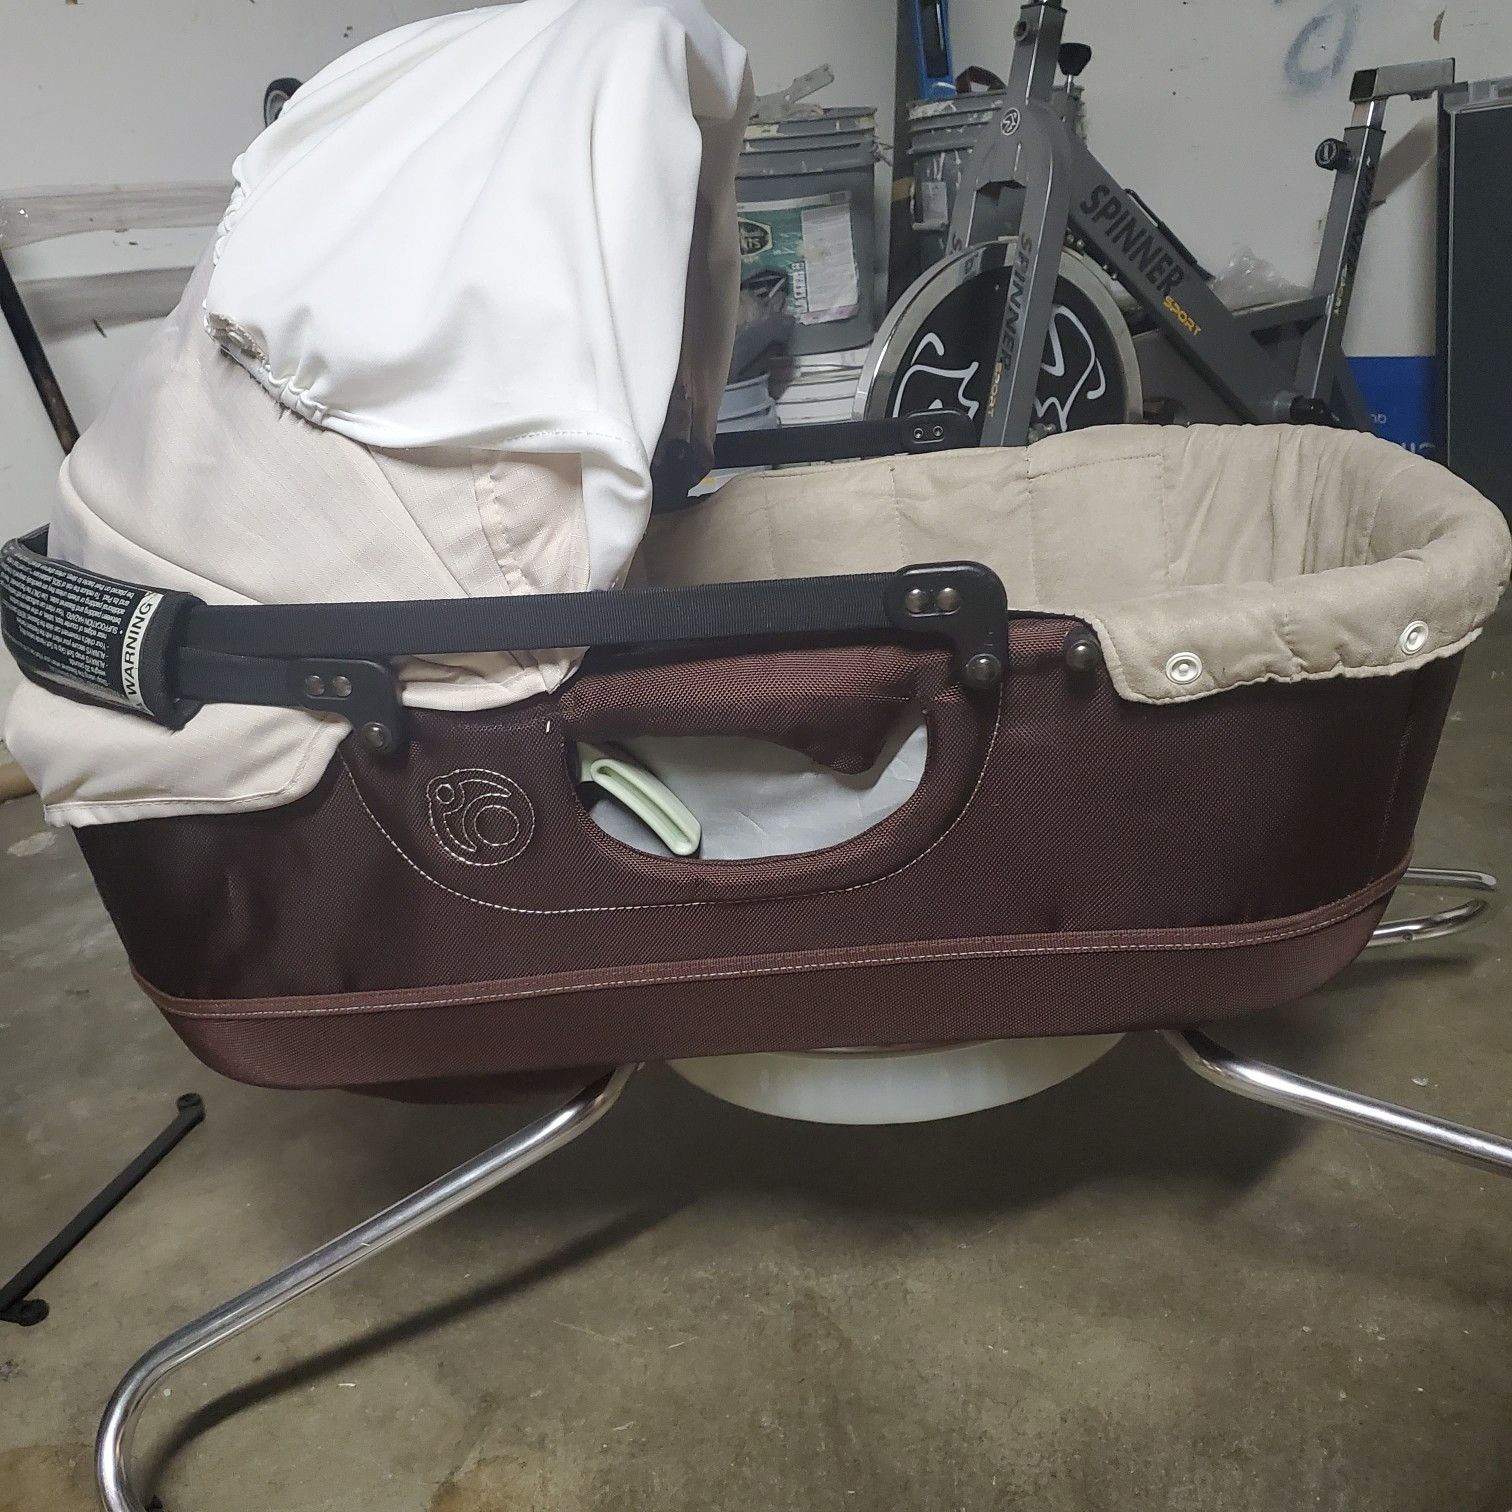 Bag of 3 month old clothes diaper and bassinet that attaches to urbini stroller